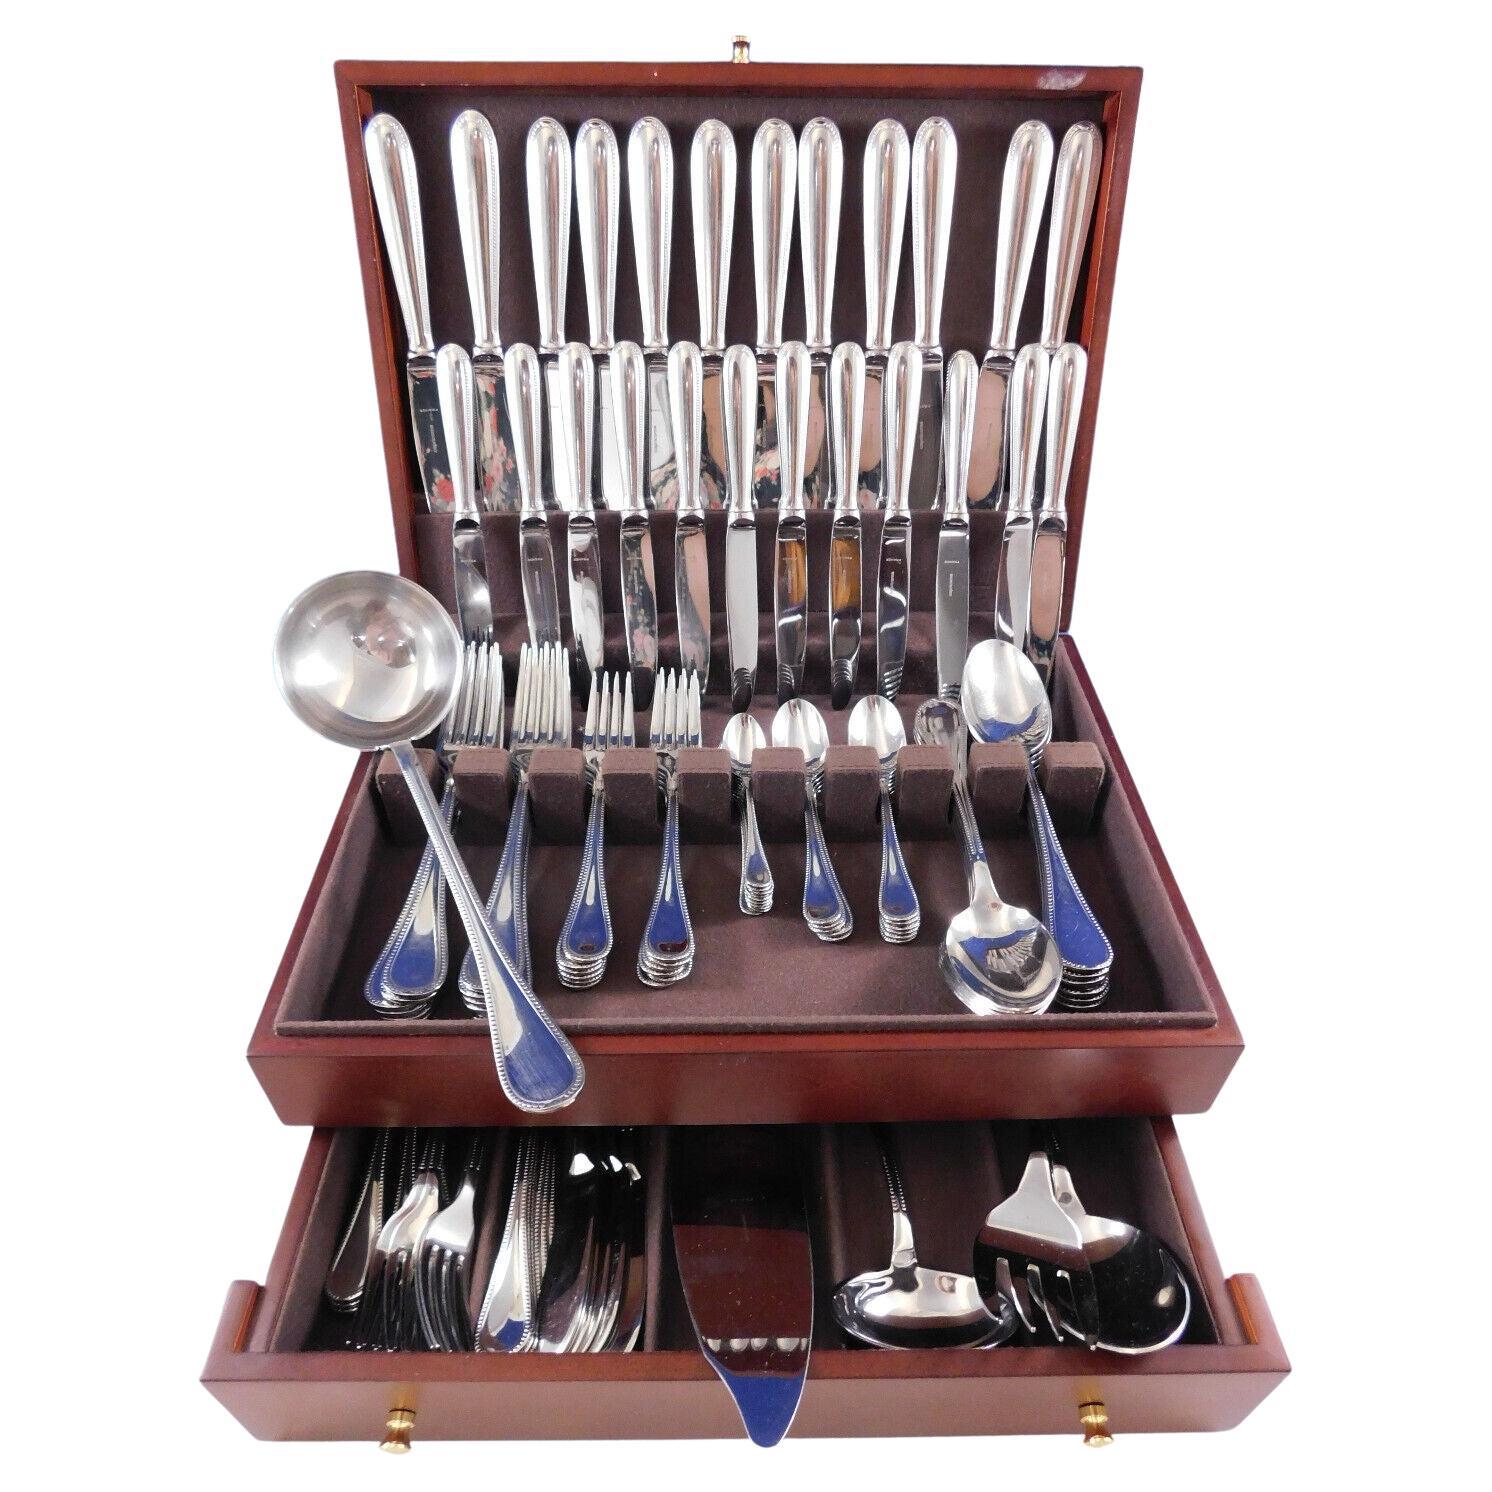 Perles by Christofle France Stainless Steel Flatware Service Set 109 Pcs Dinner